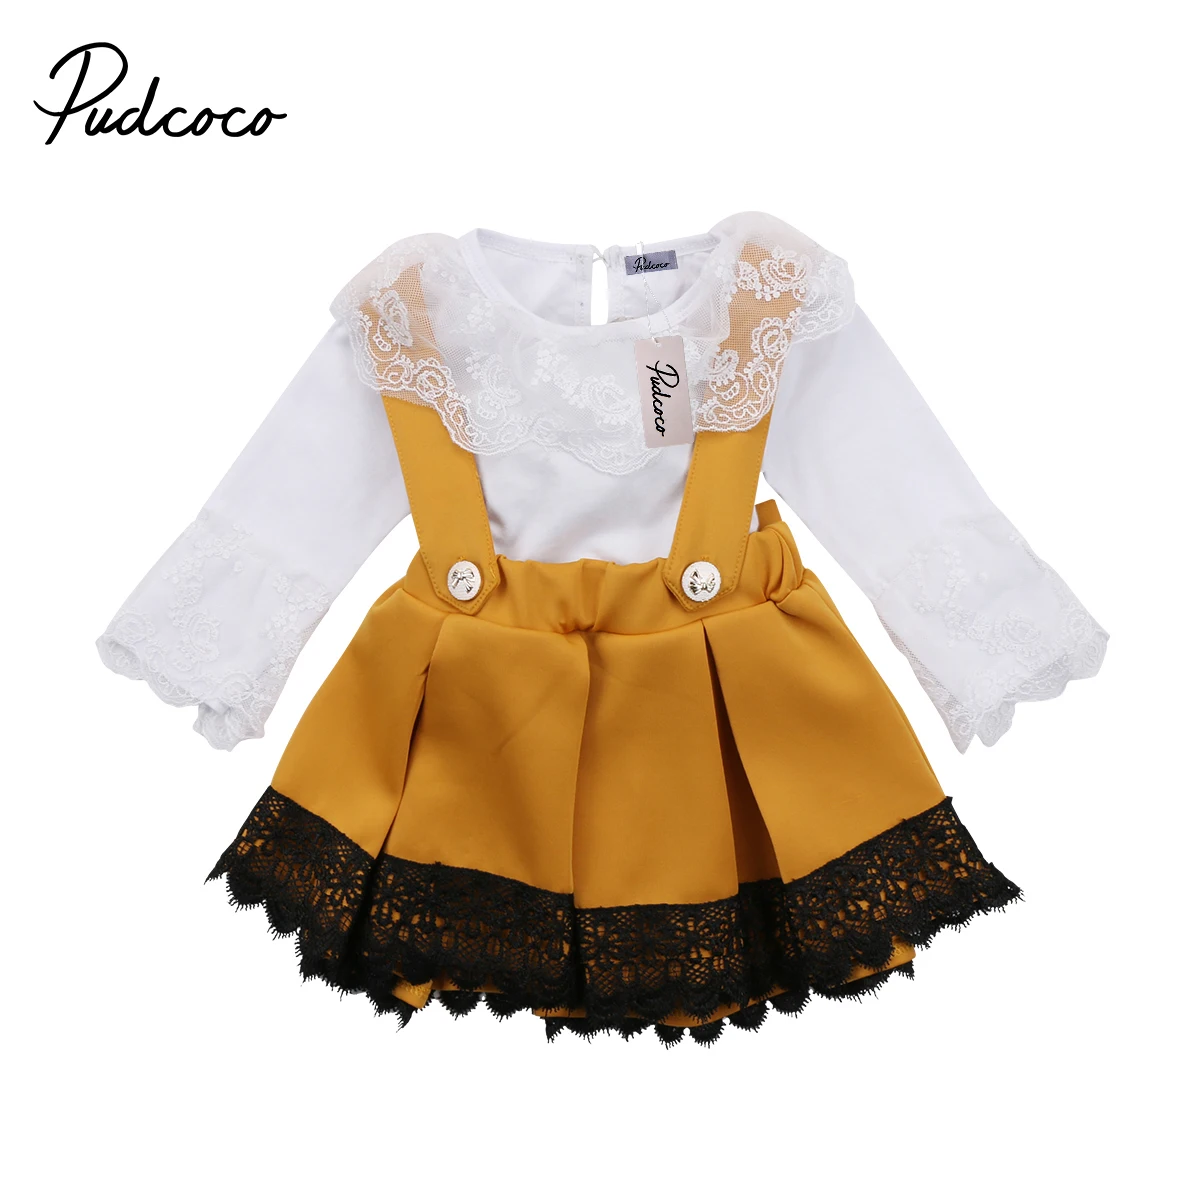 2022 Brand New Newborn Toddler Infant Kid Baby Girl Lace Jumpsuit Romper Princess Party Skirt 2Pc Outfit Set Long Sleeve Clothes